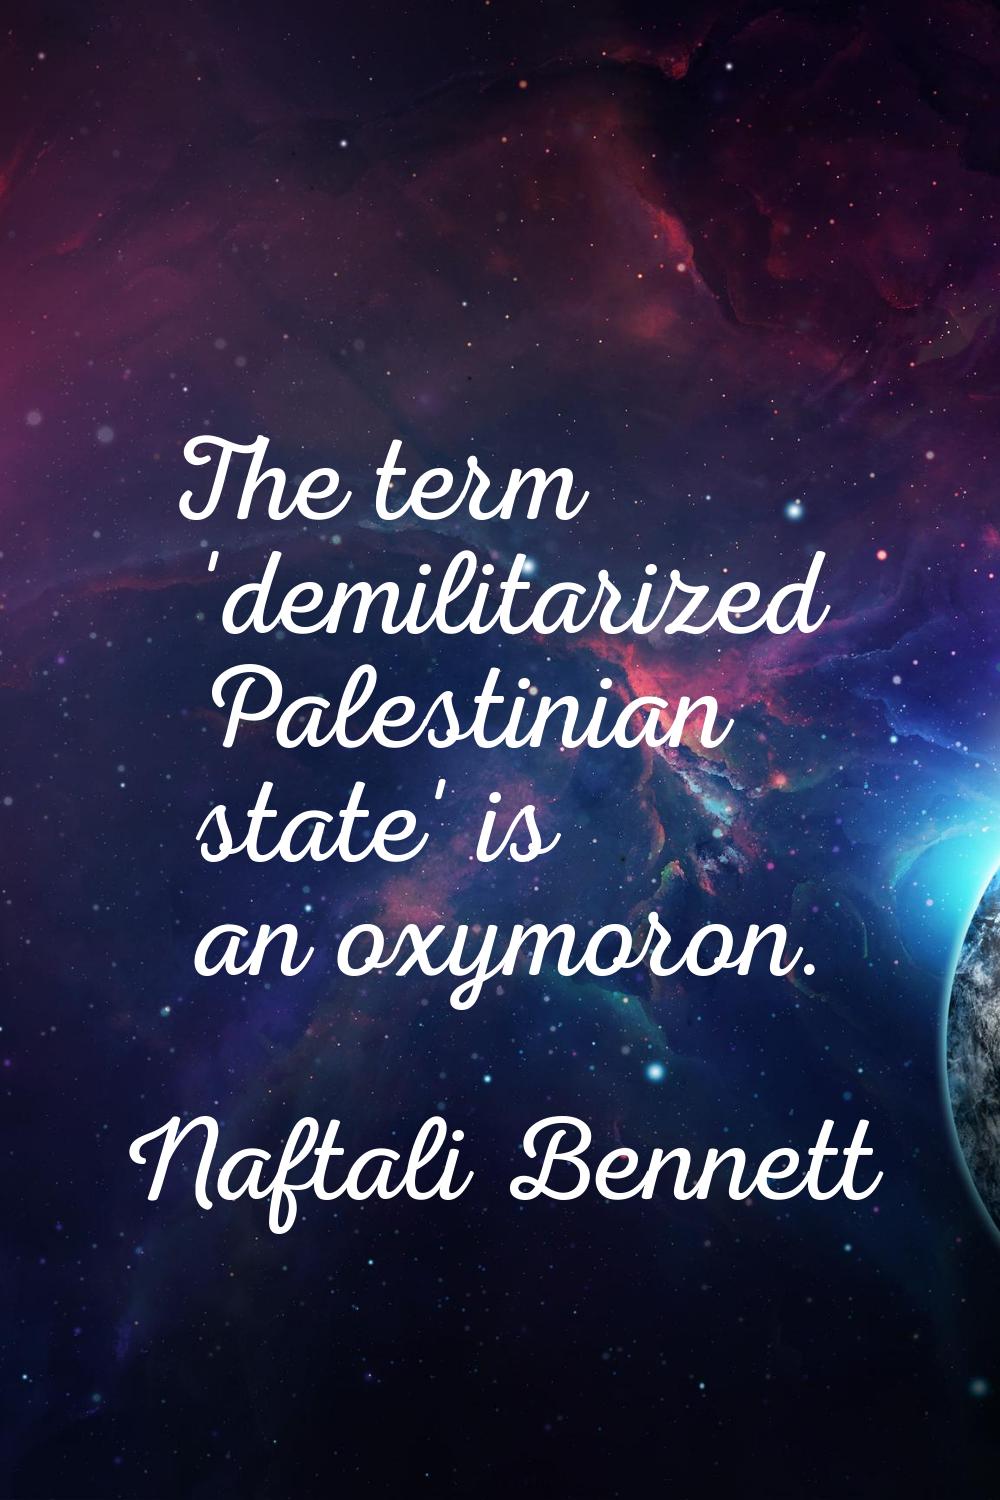 The term 'demilitarized Palestinian state' is an oxymoron.